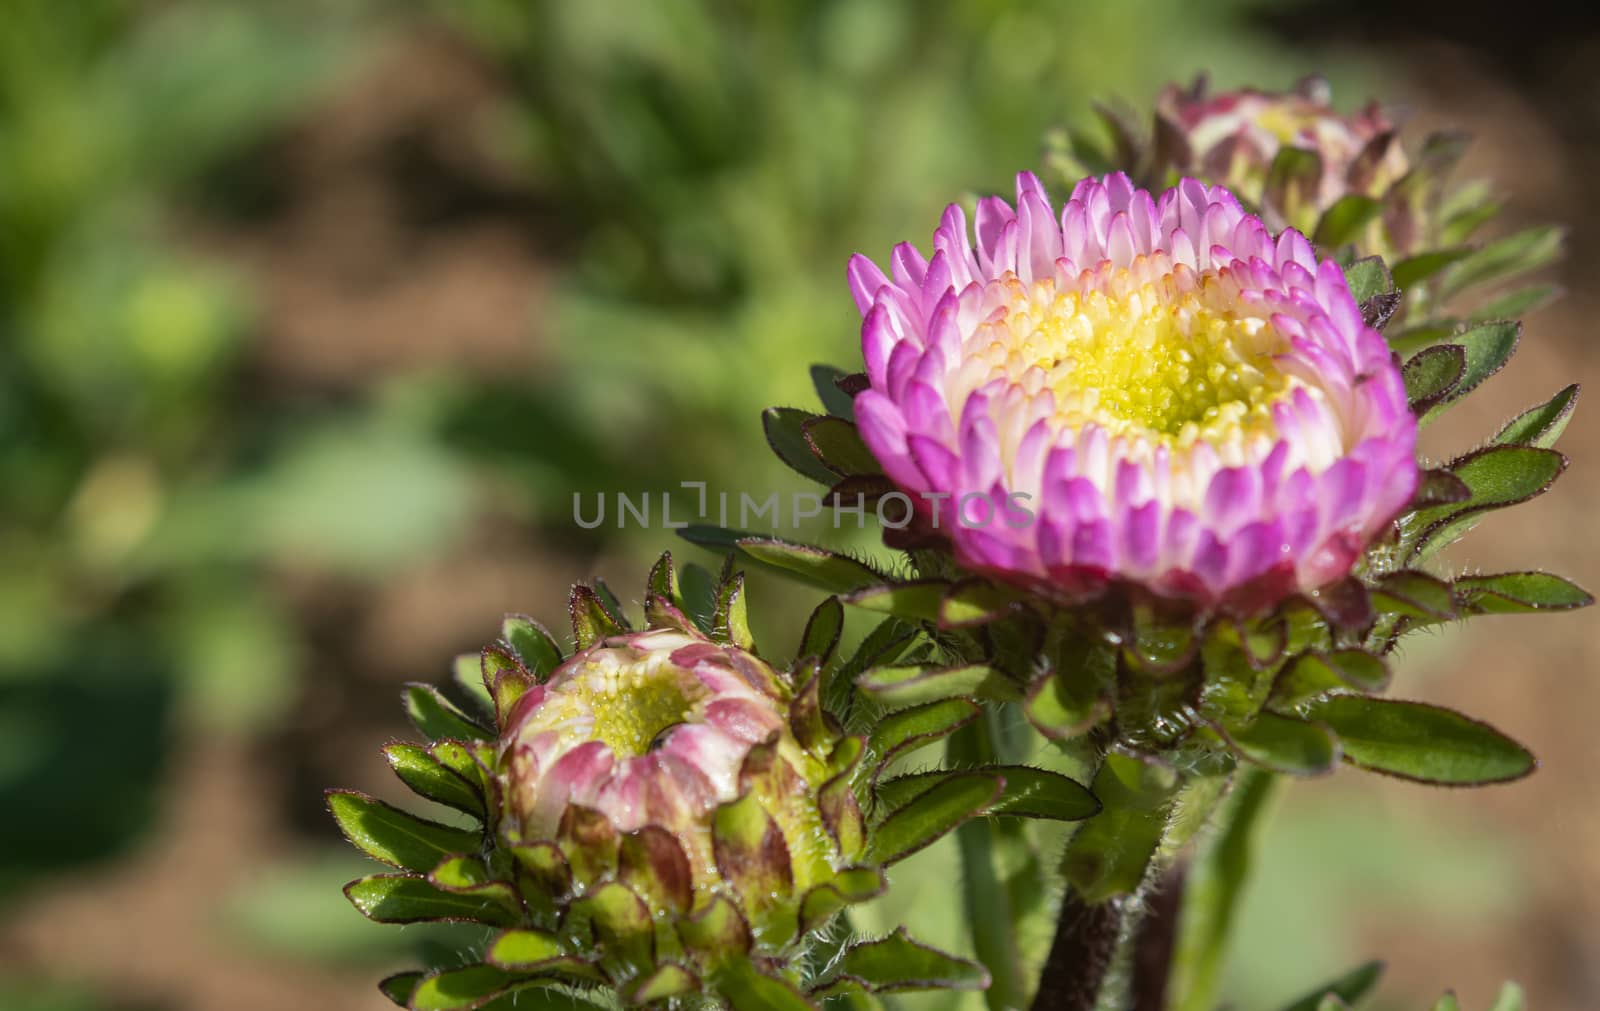 Pink Chrysanthemum or Mums Flowers in Garden with Natural Light  by steafpong